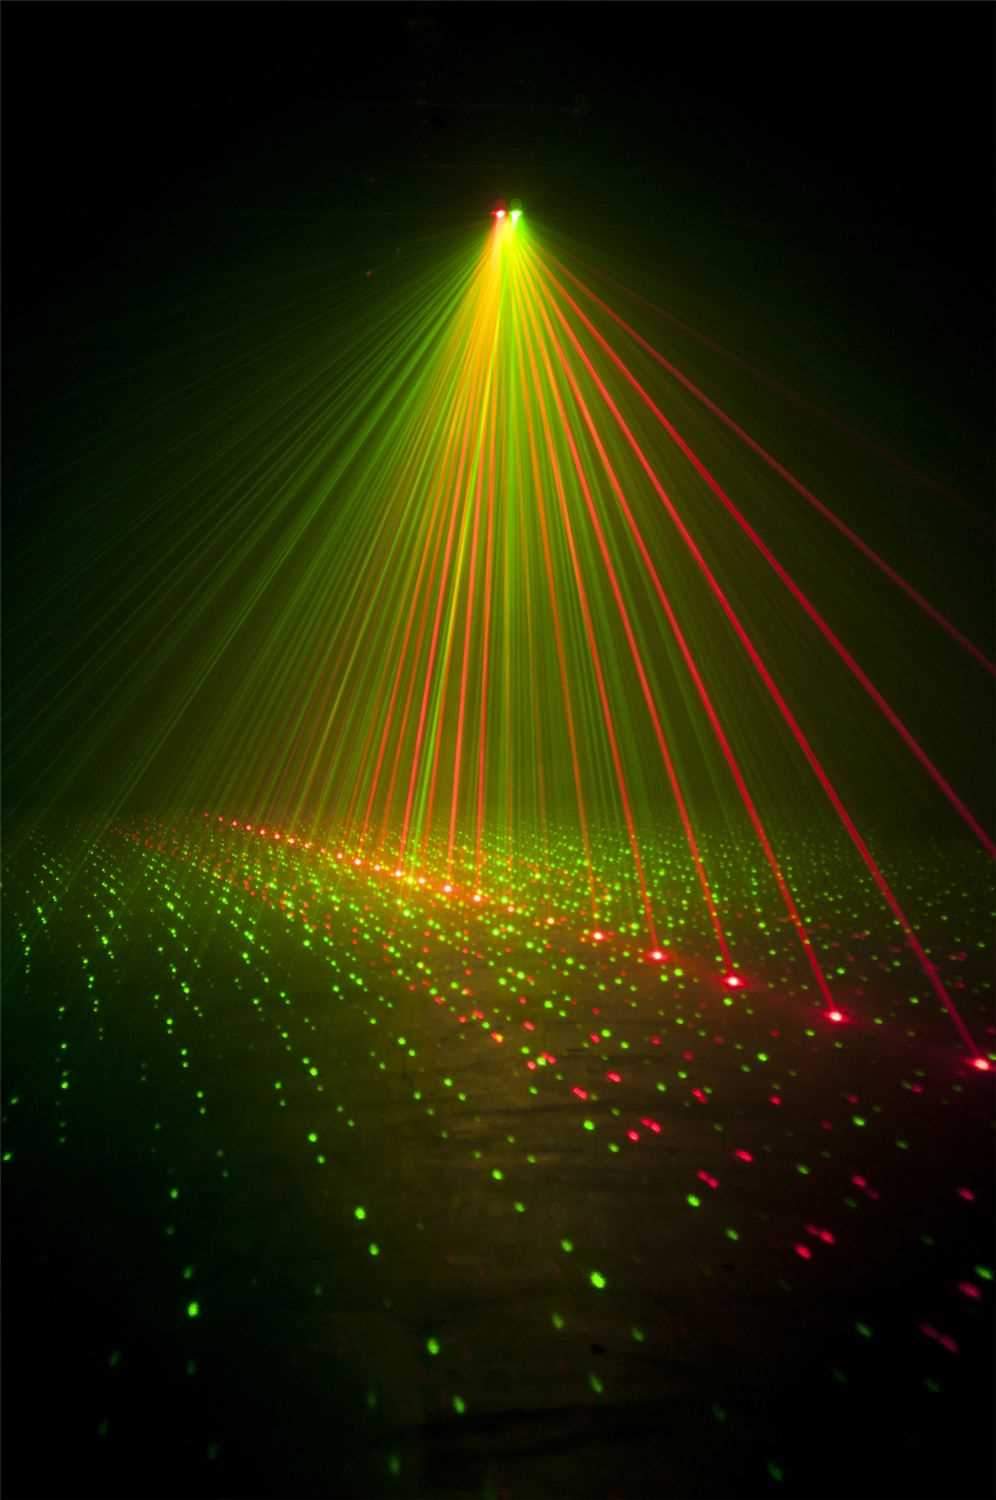 ADJ American DJ Galaxian 3D MKII Red and Green Laser - ProSound and Stage Lighting